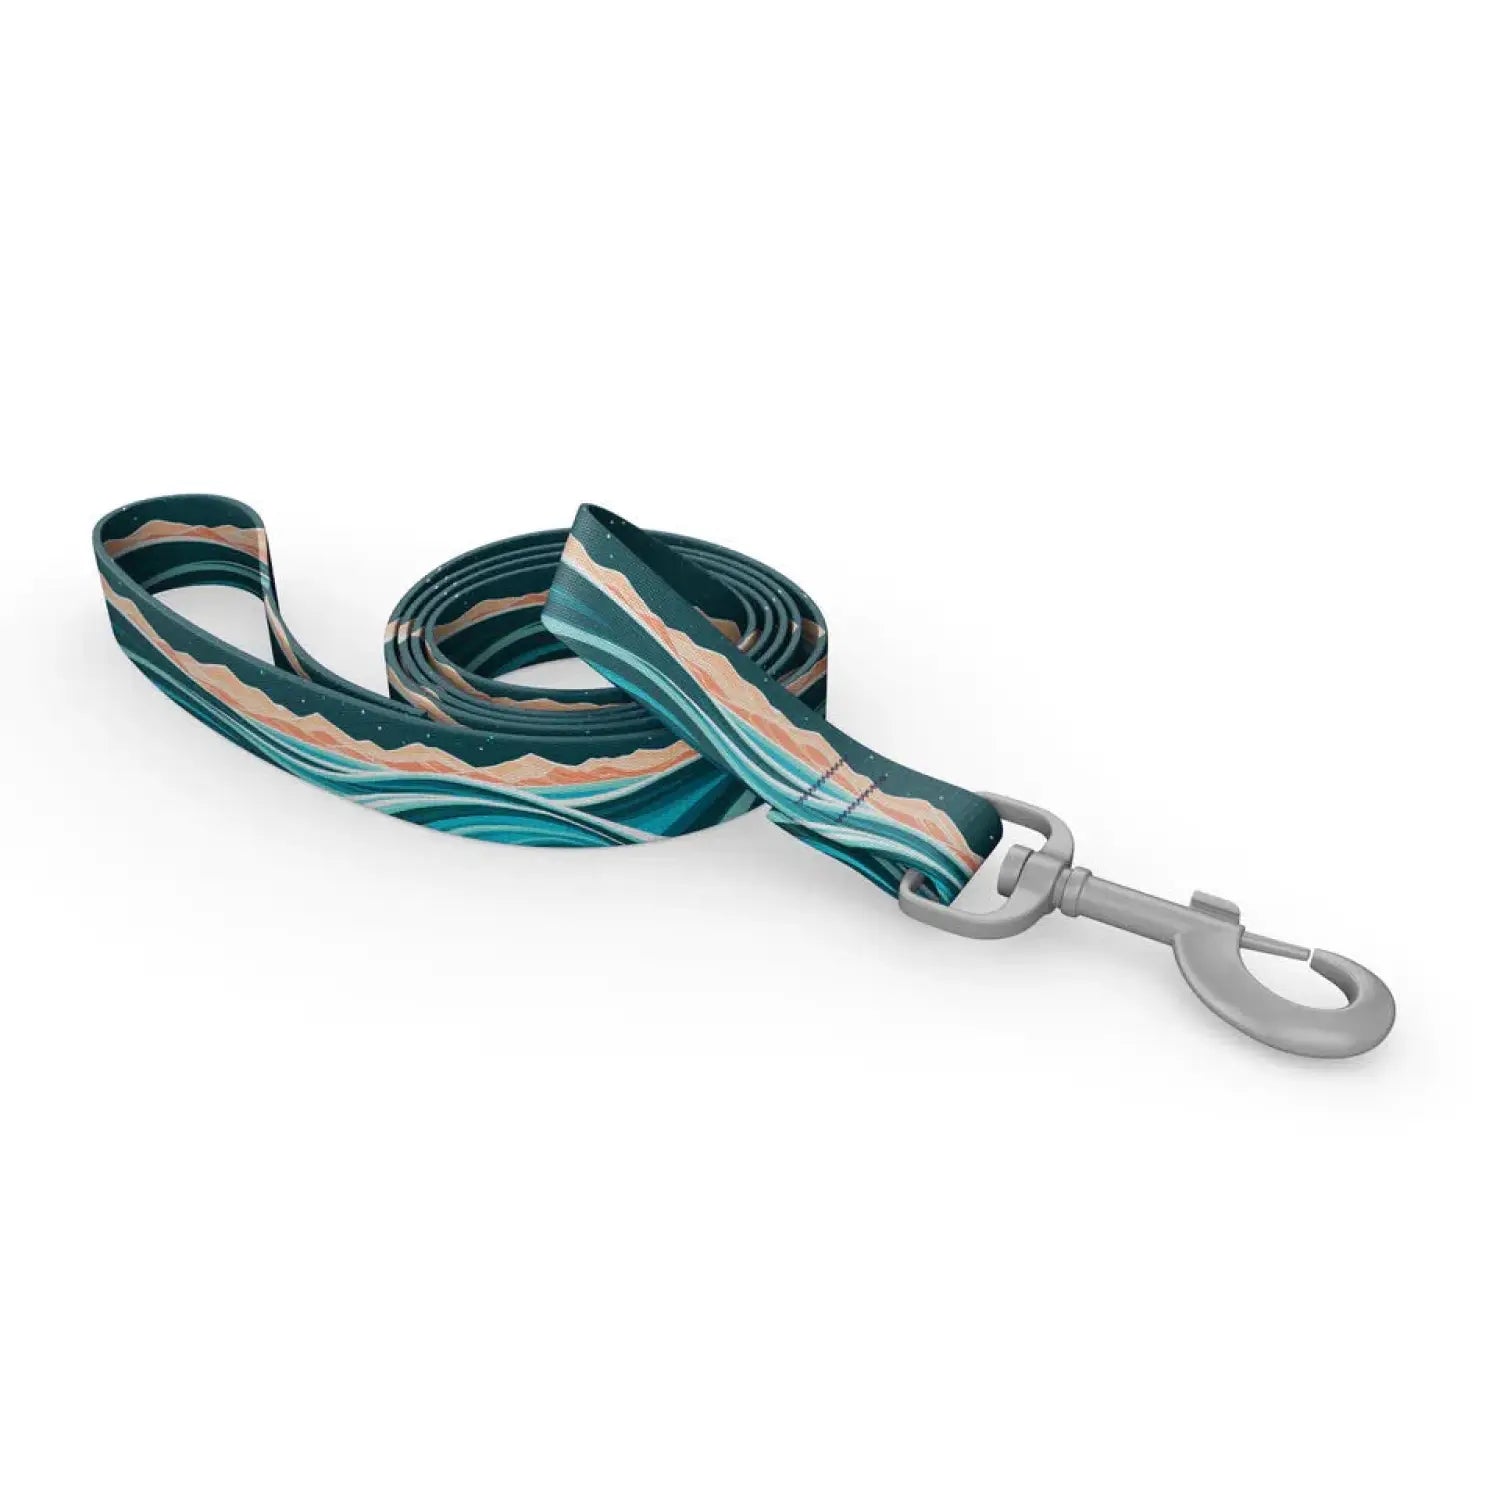 Wingo Outdoors Dog Leash in Rolling Seas design, teal cream and coral sea scape.